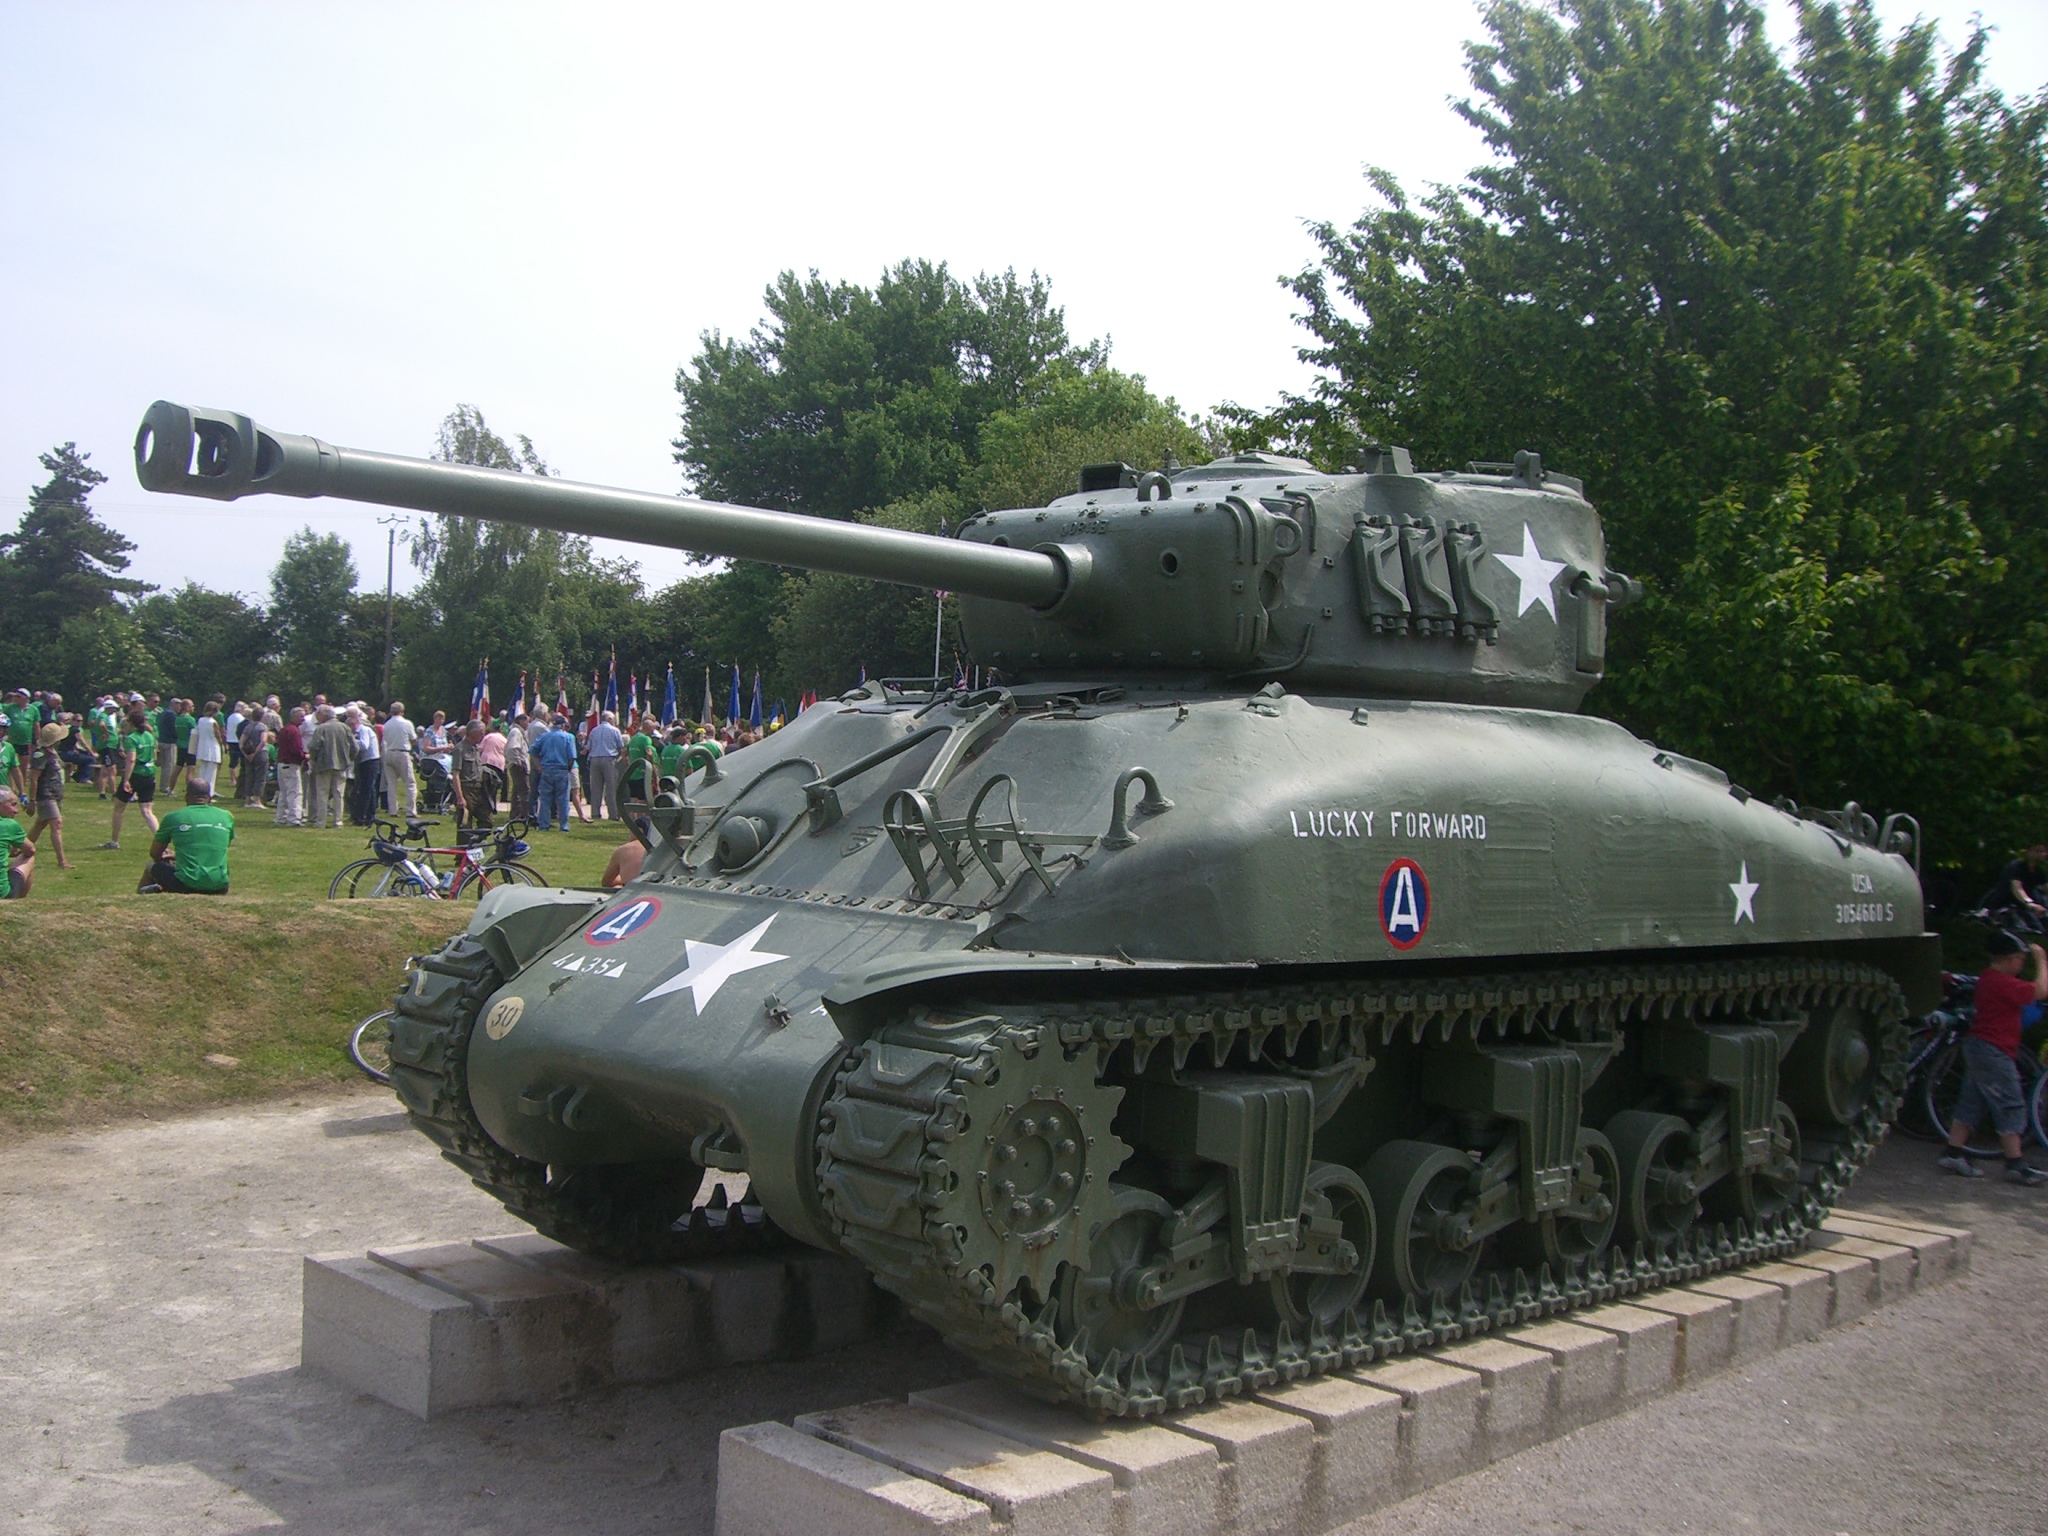 a tank in a museum display with people around